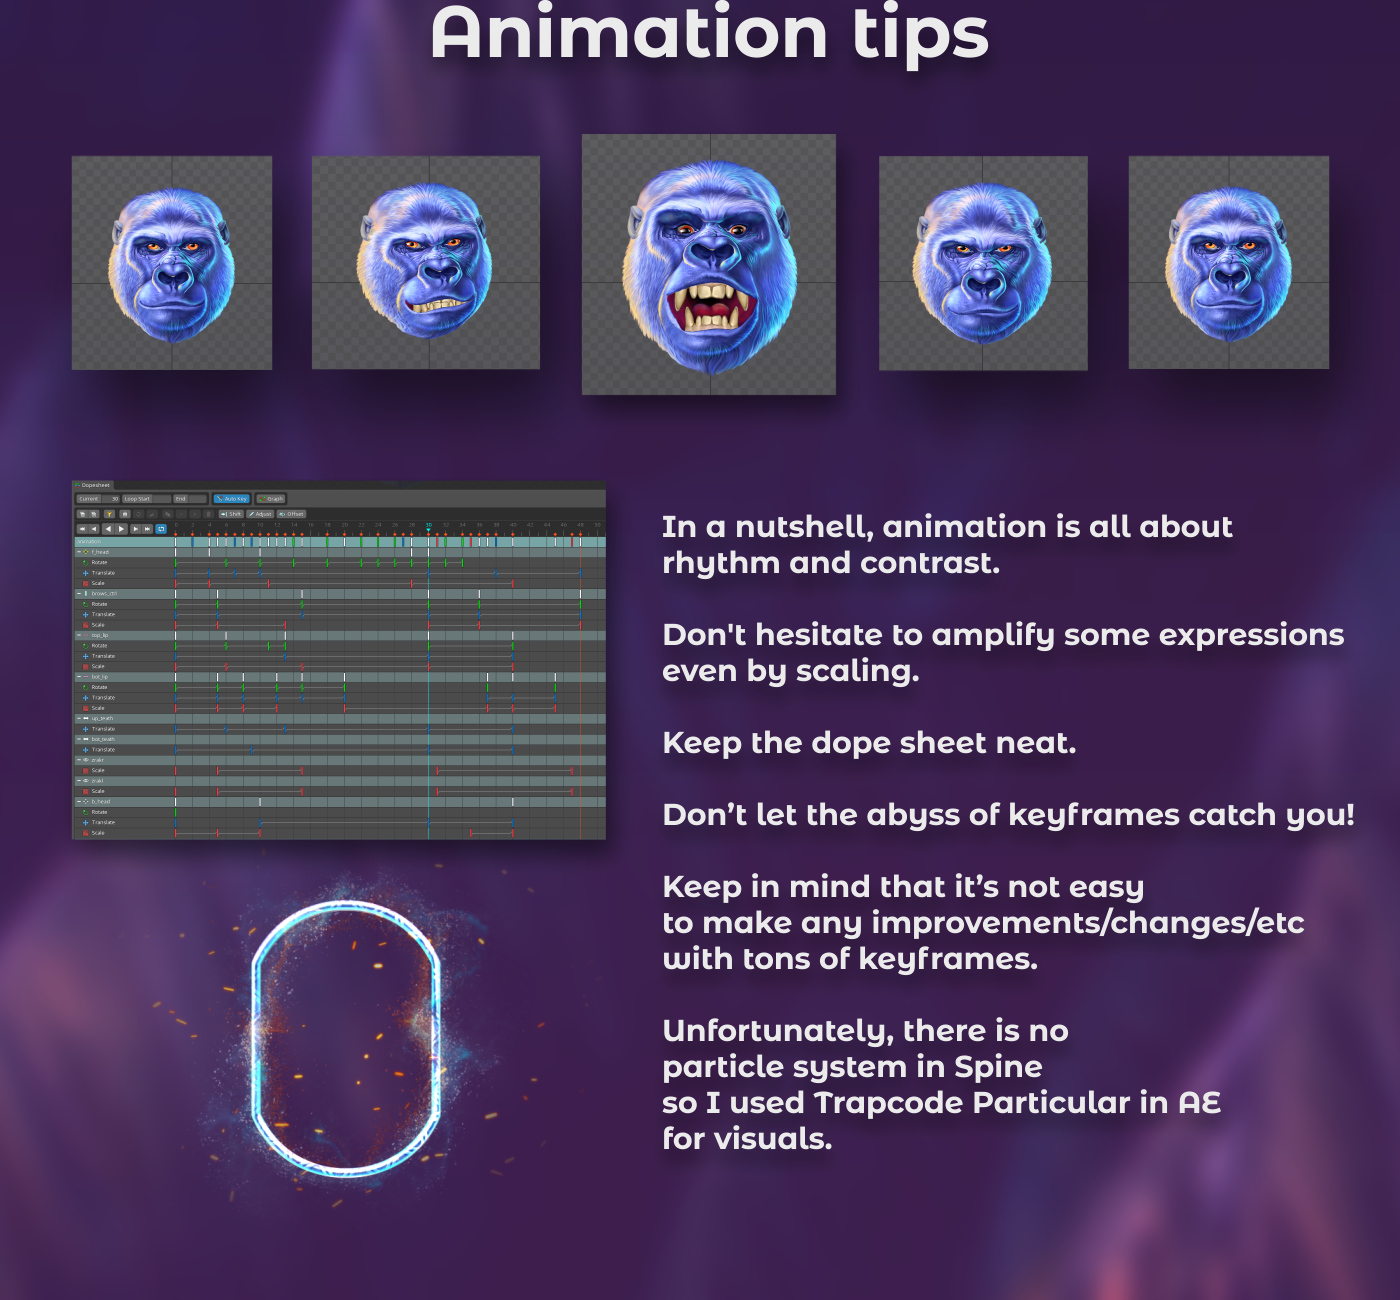 Gorilla | Game Animation + Overview on Behance